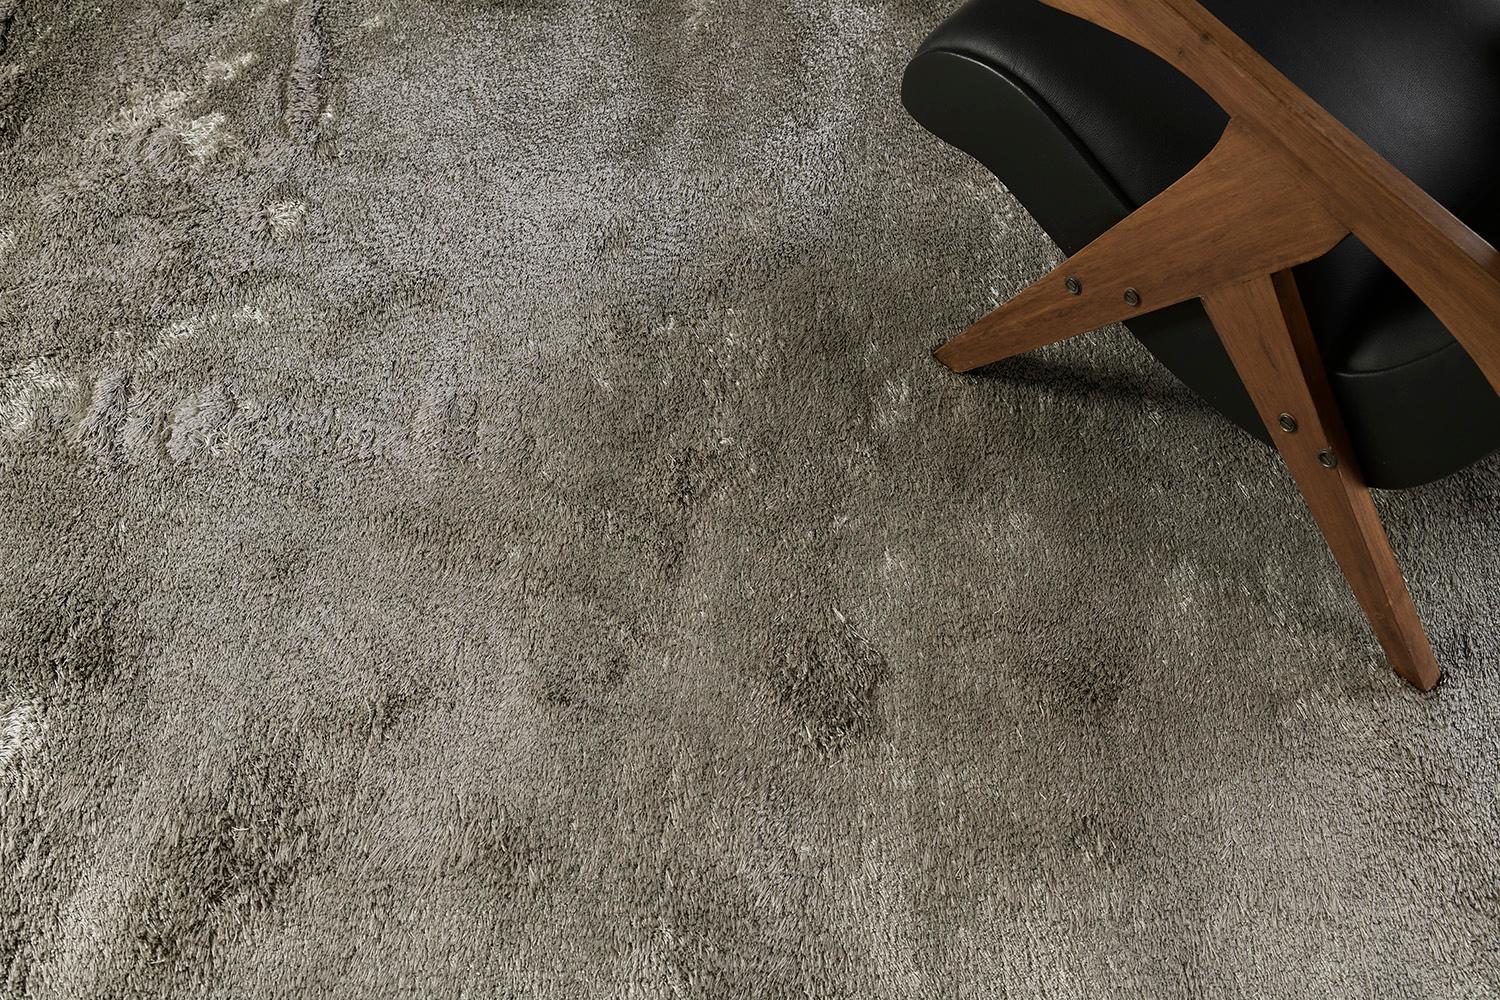 Effortless elegance meets versatility in this Solid Design Viscose Rug. Rendered in the most calming shade of gray, this plush rug called Lusso' gives you the lightweight vibe to the room which makes it most suitable to minimalist interiors. A